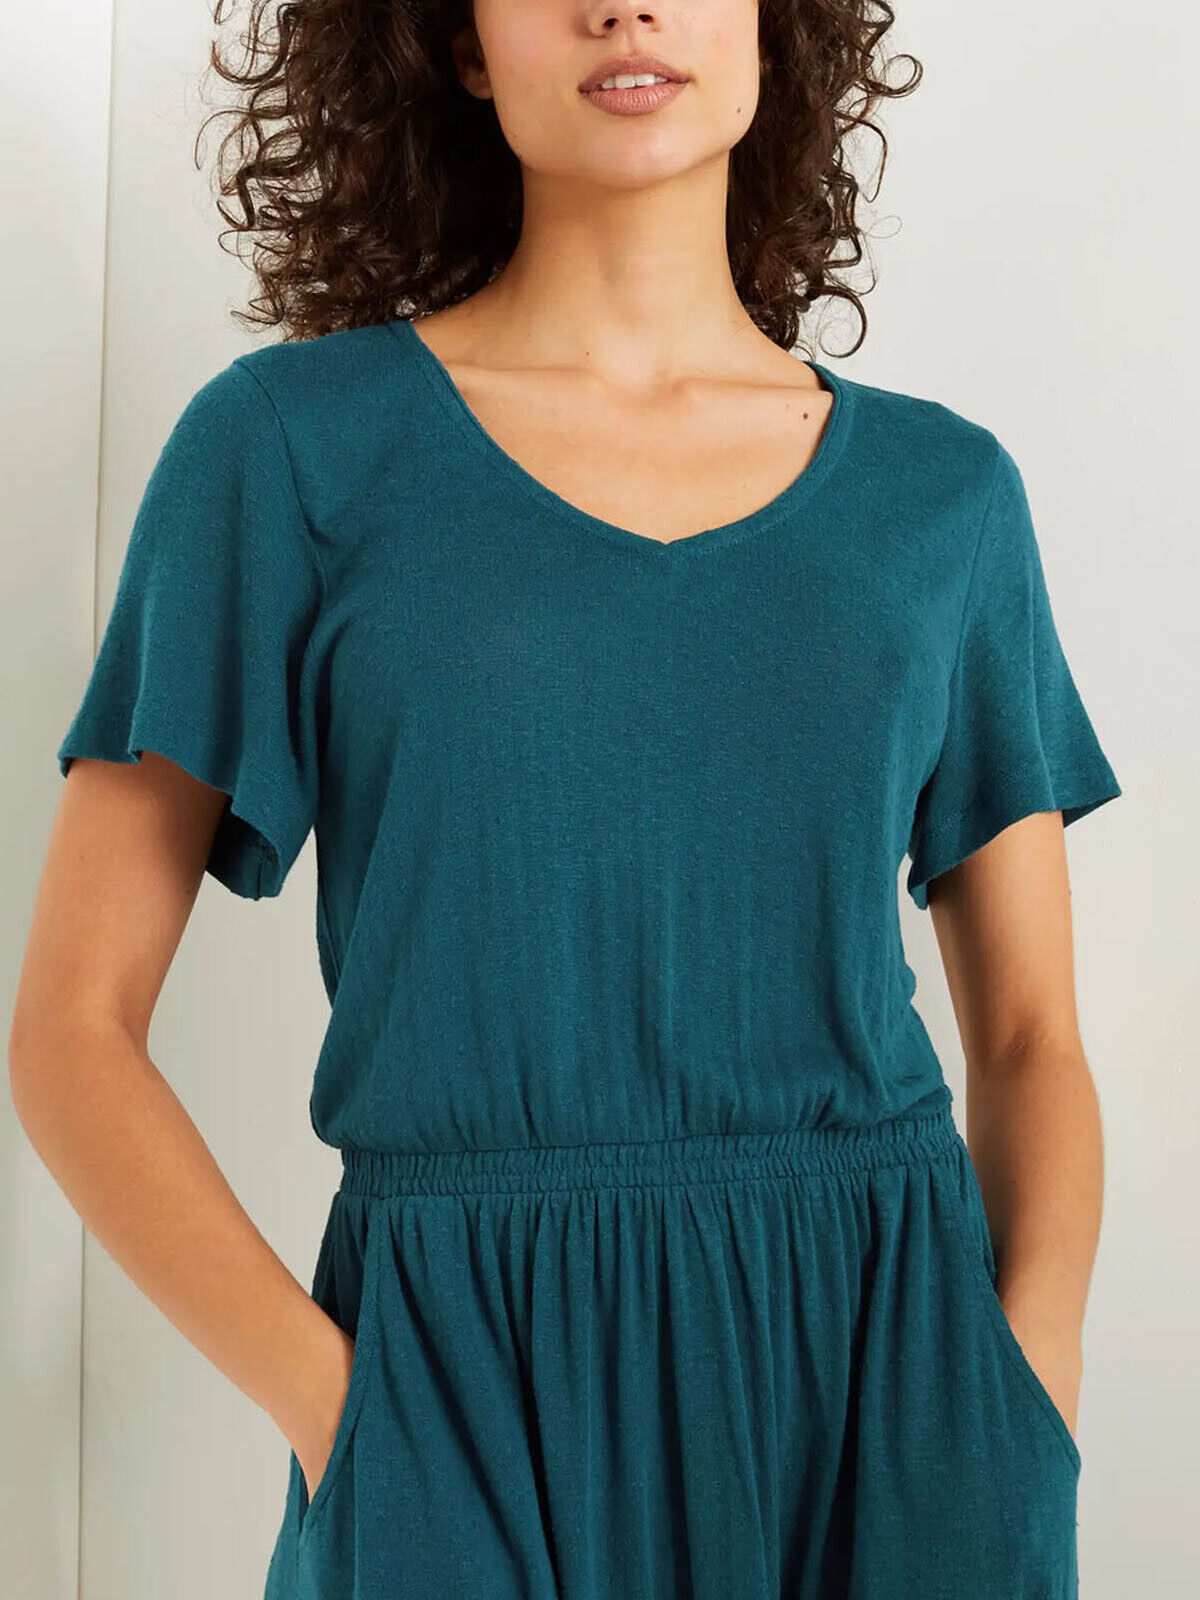 EX WHITE STUFF Teal Canyon Jersey Dress in Sizes 6, 10, 12, 18, 20 RRP £55